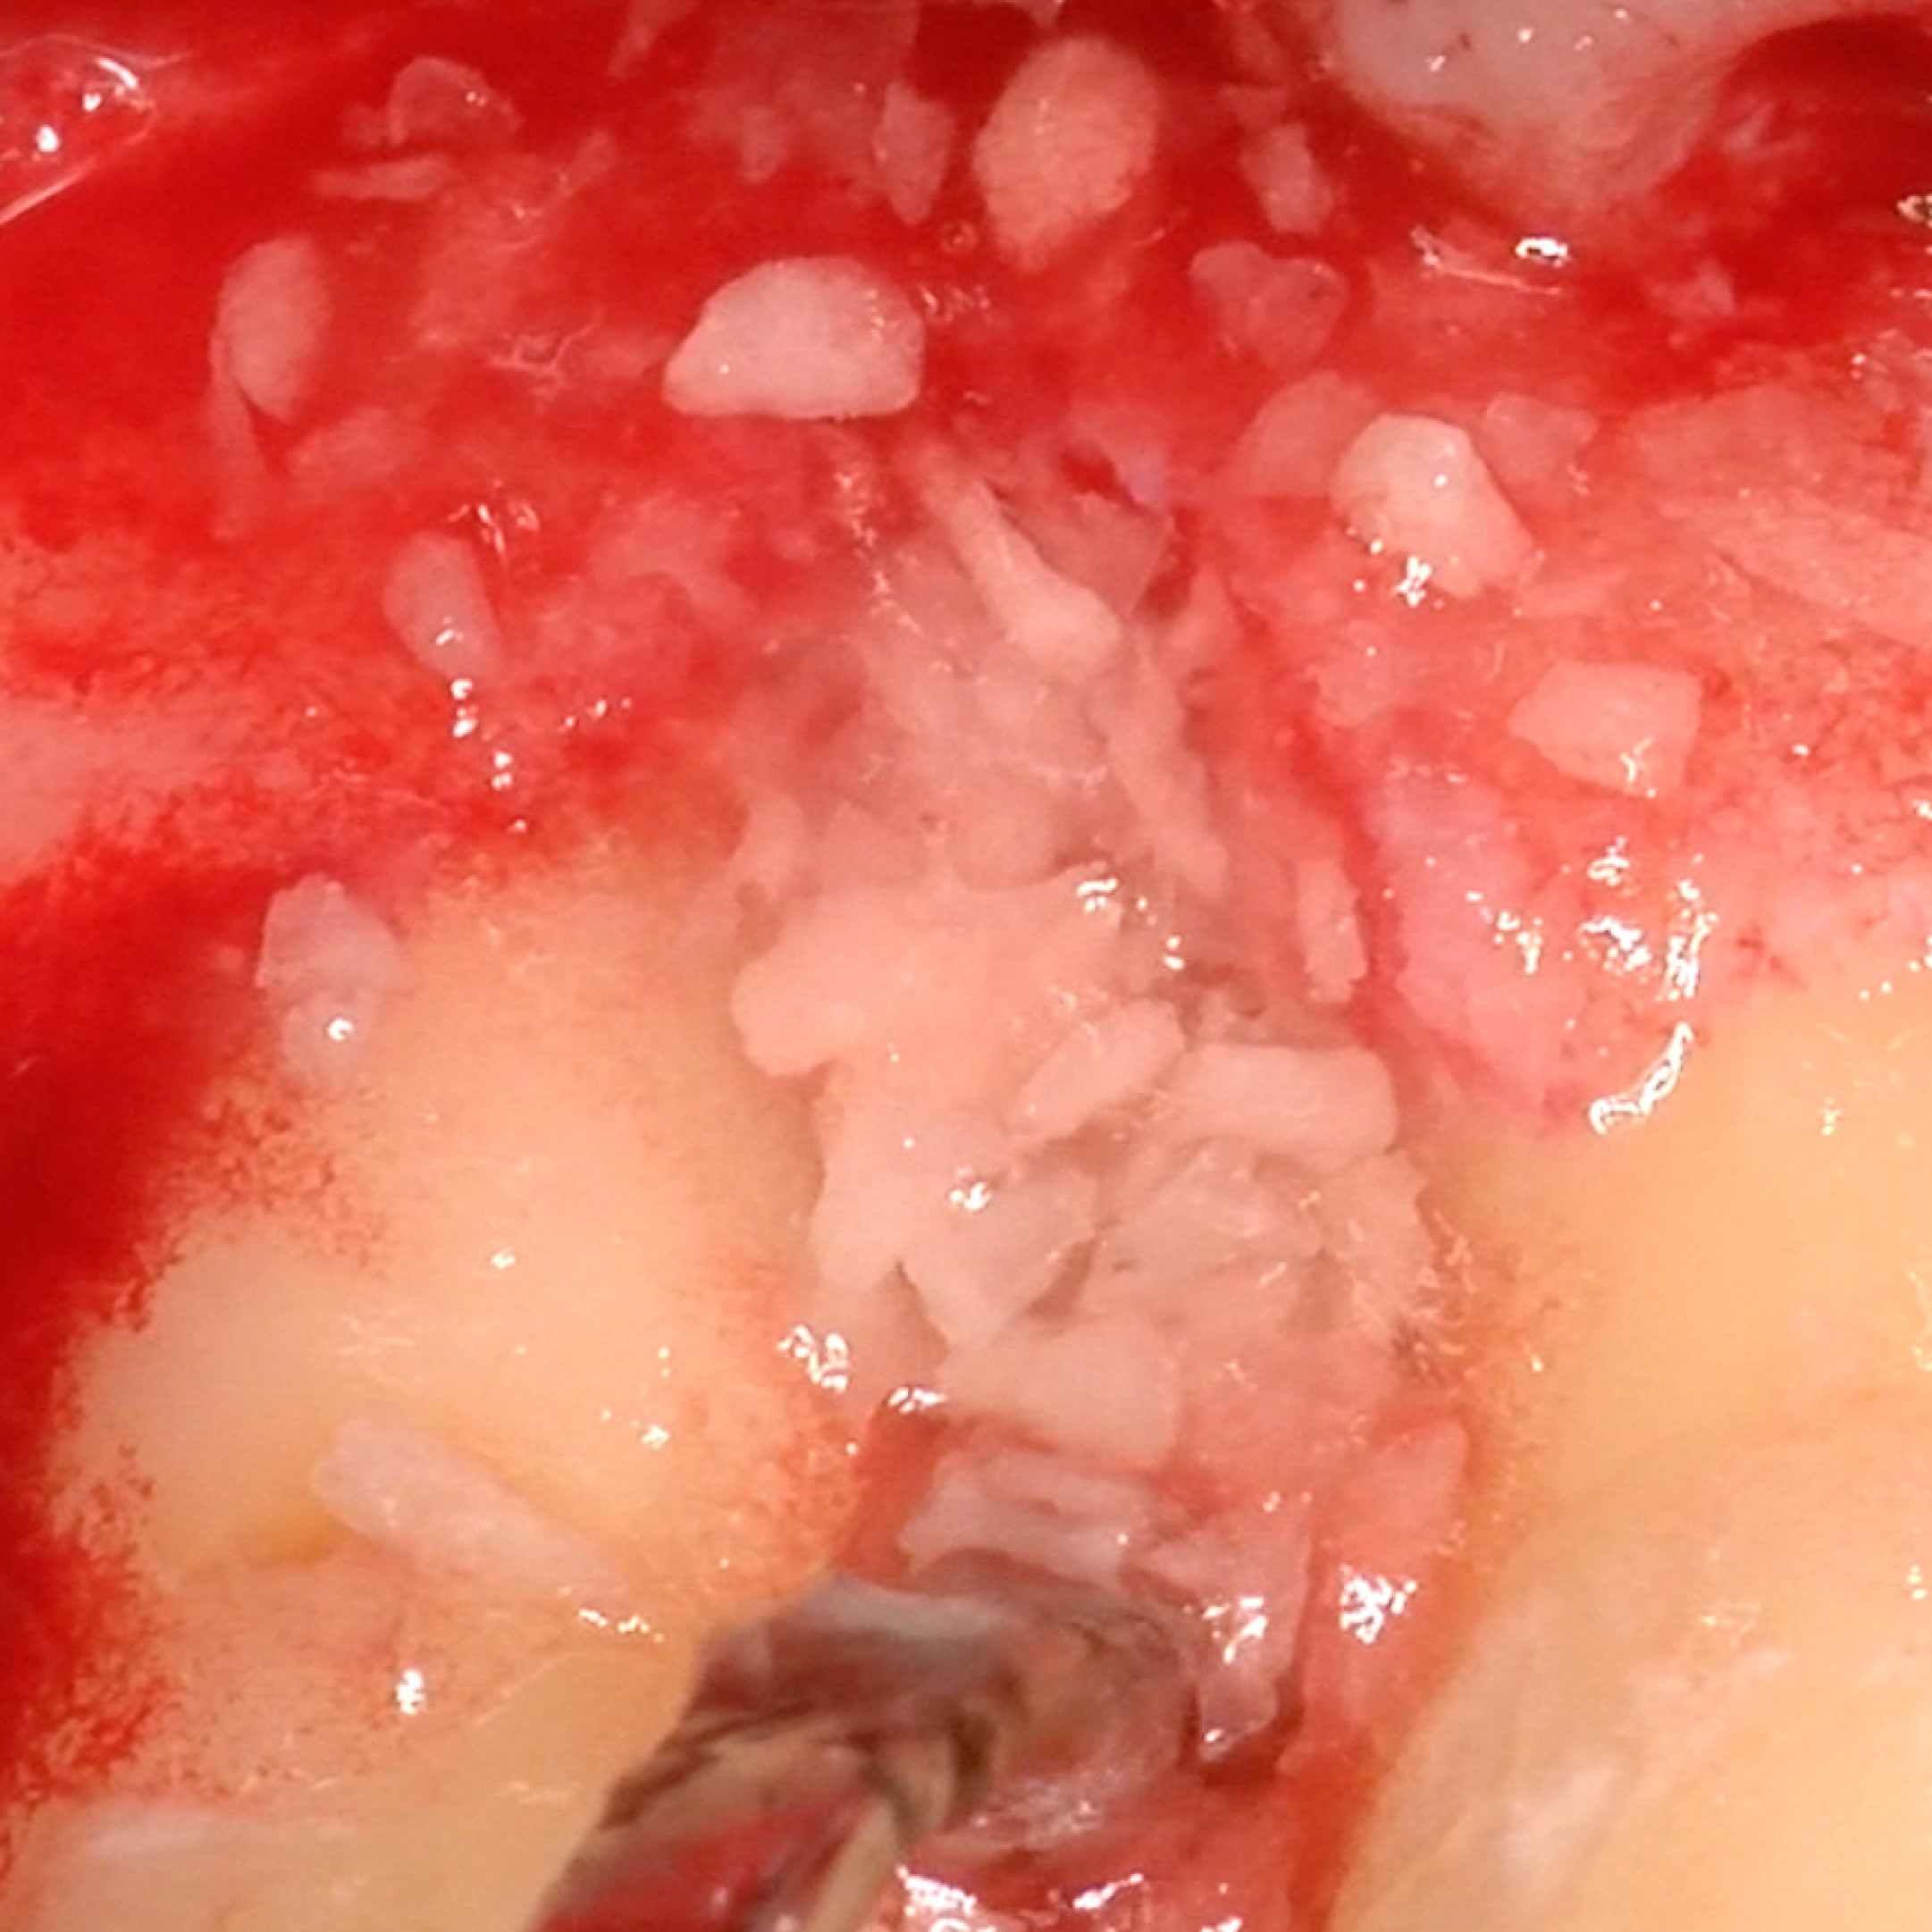 Dental Case of hard tissue regeneration by Prof. Pilloni showing treatment of infrabony defect with hyaluronic acid